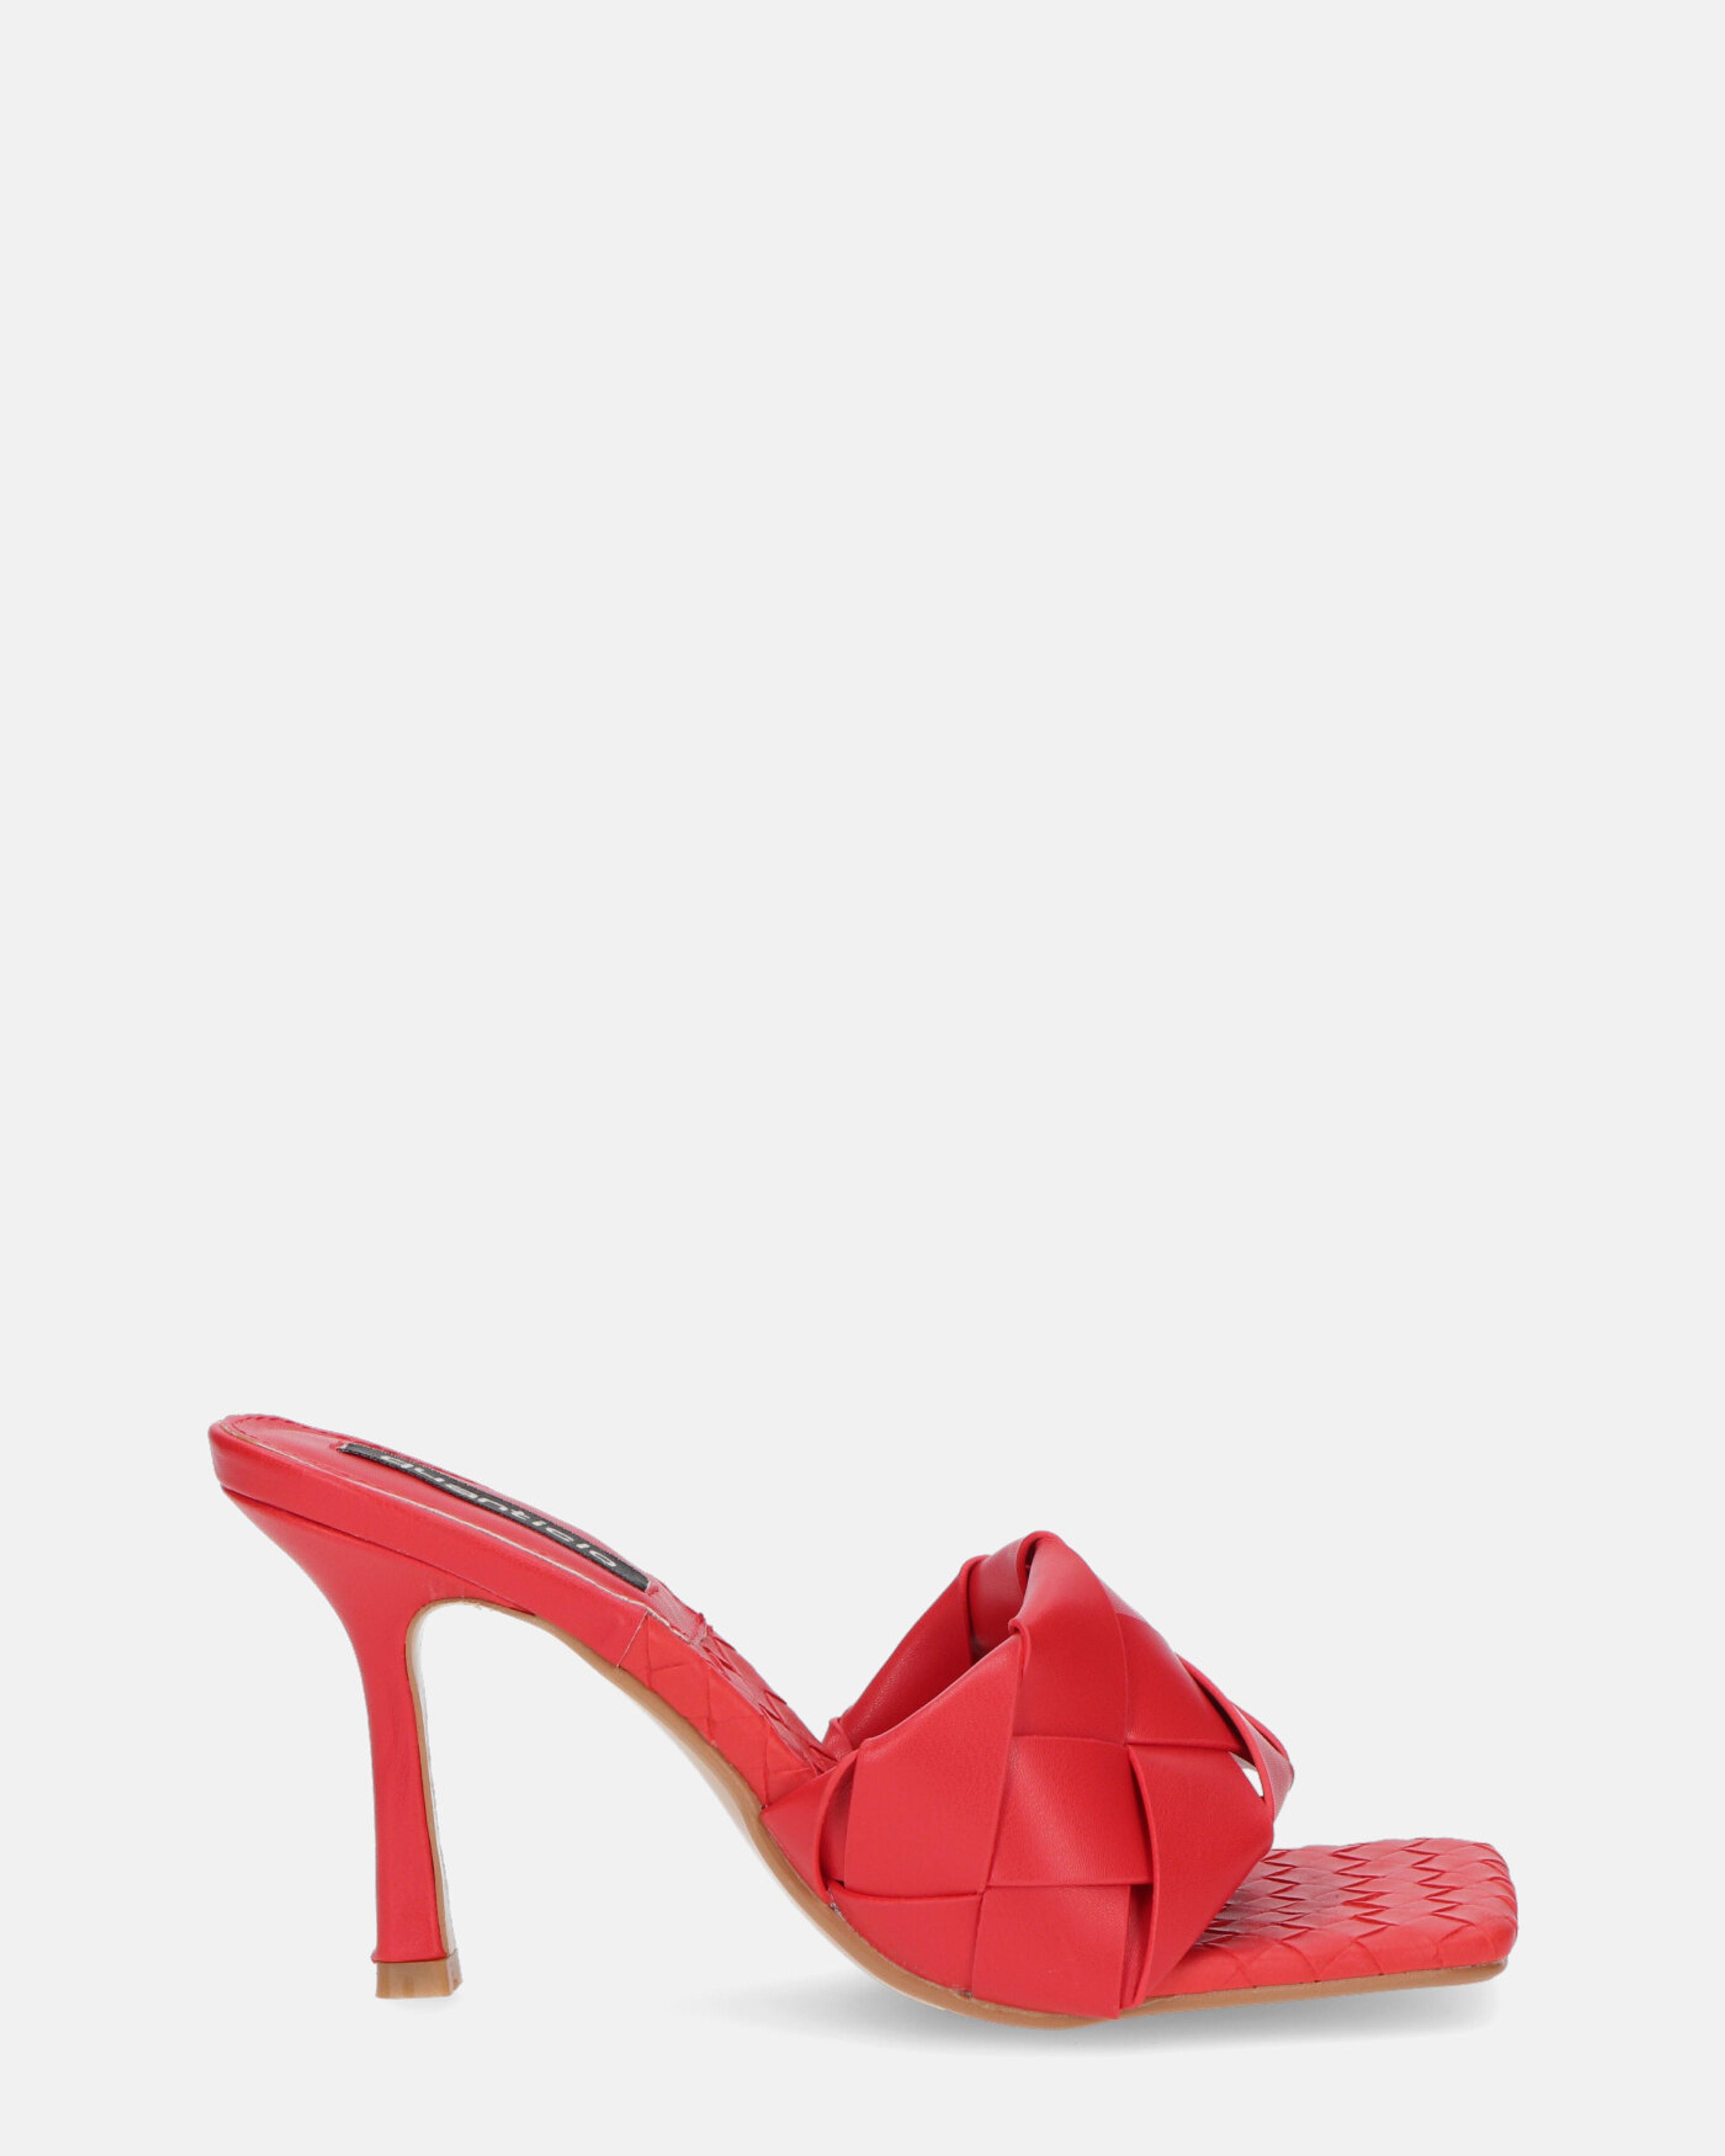 ENRICA - sandal in red woven leather with heel